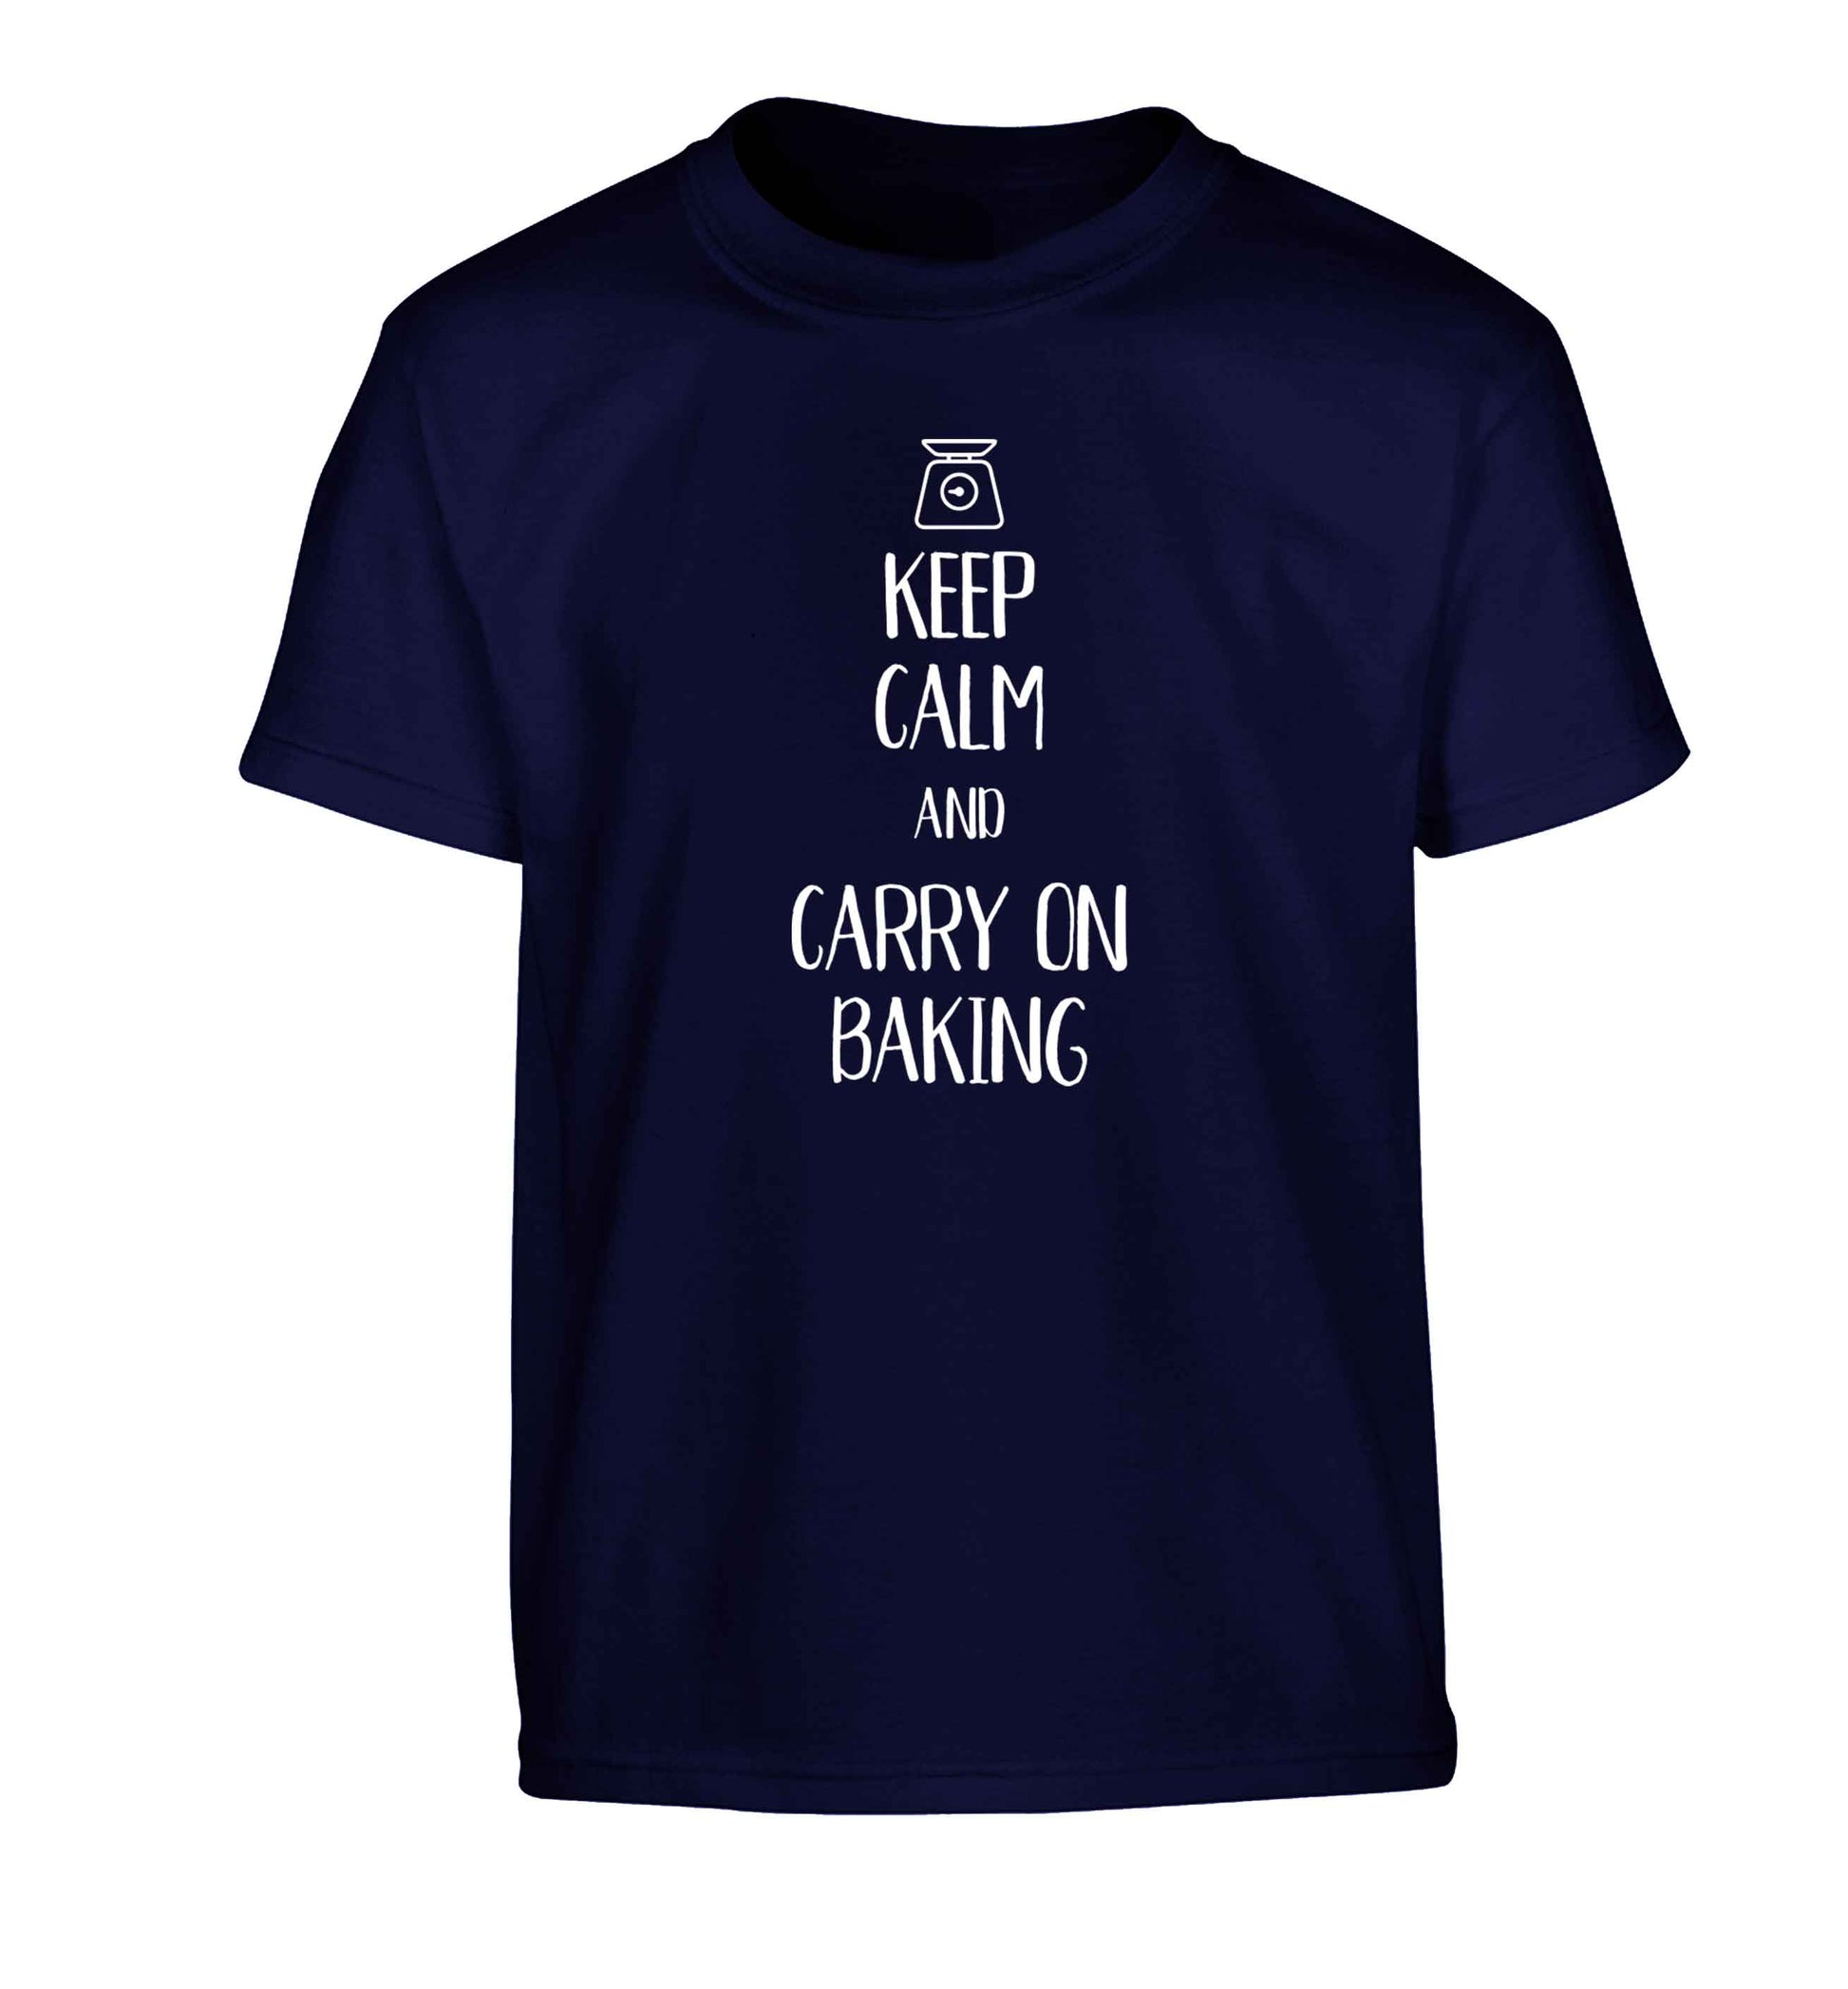 Keep calm and carry on baking Children's navy Tshirt 12-13 Years